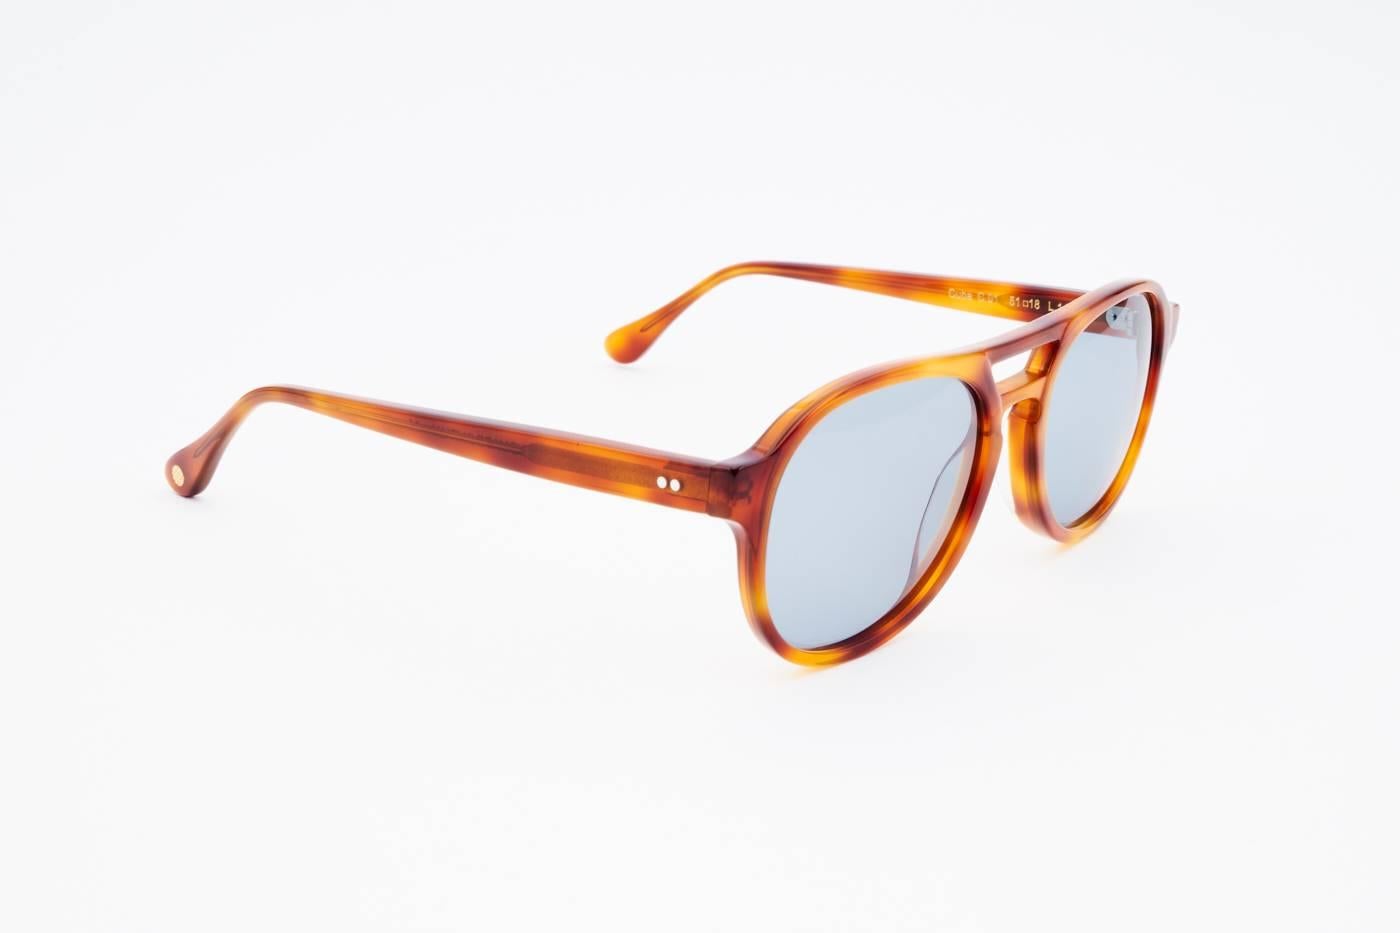 Berenford Cuba eyewear style was inspired by Cuba, which was a favourite getaway of Sir Berenford. Enjoying the tropical island lifestyle, he was haning out in Havana, and entertaining with his close friend Hemingway in the Finca, after afternoons